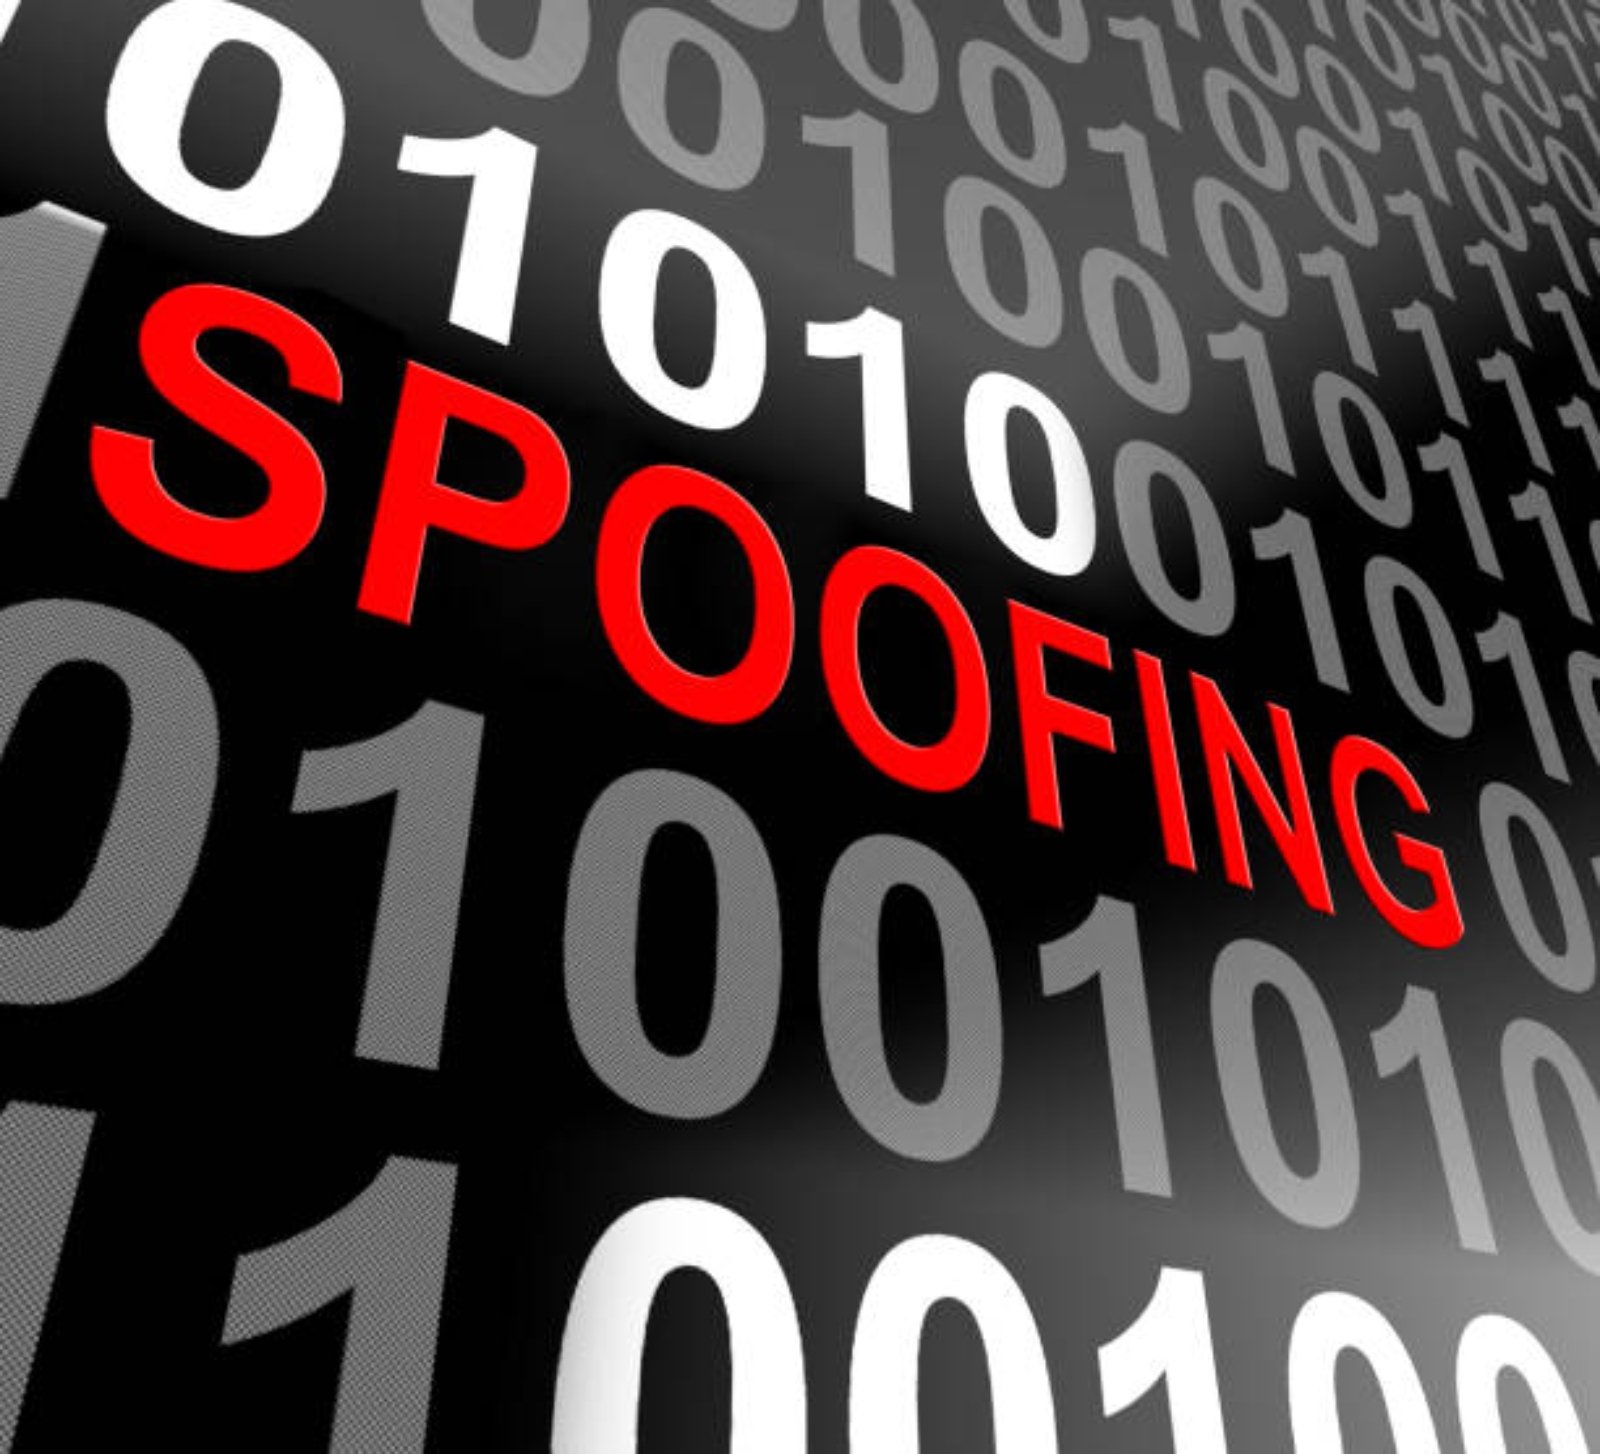 call spoofing